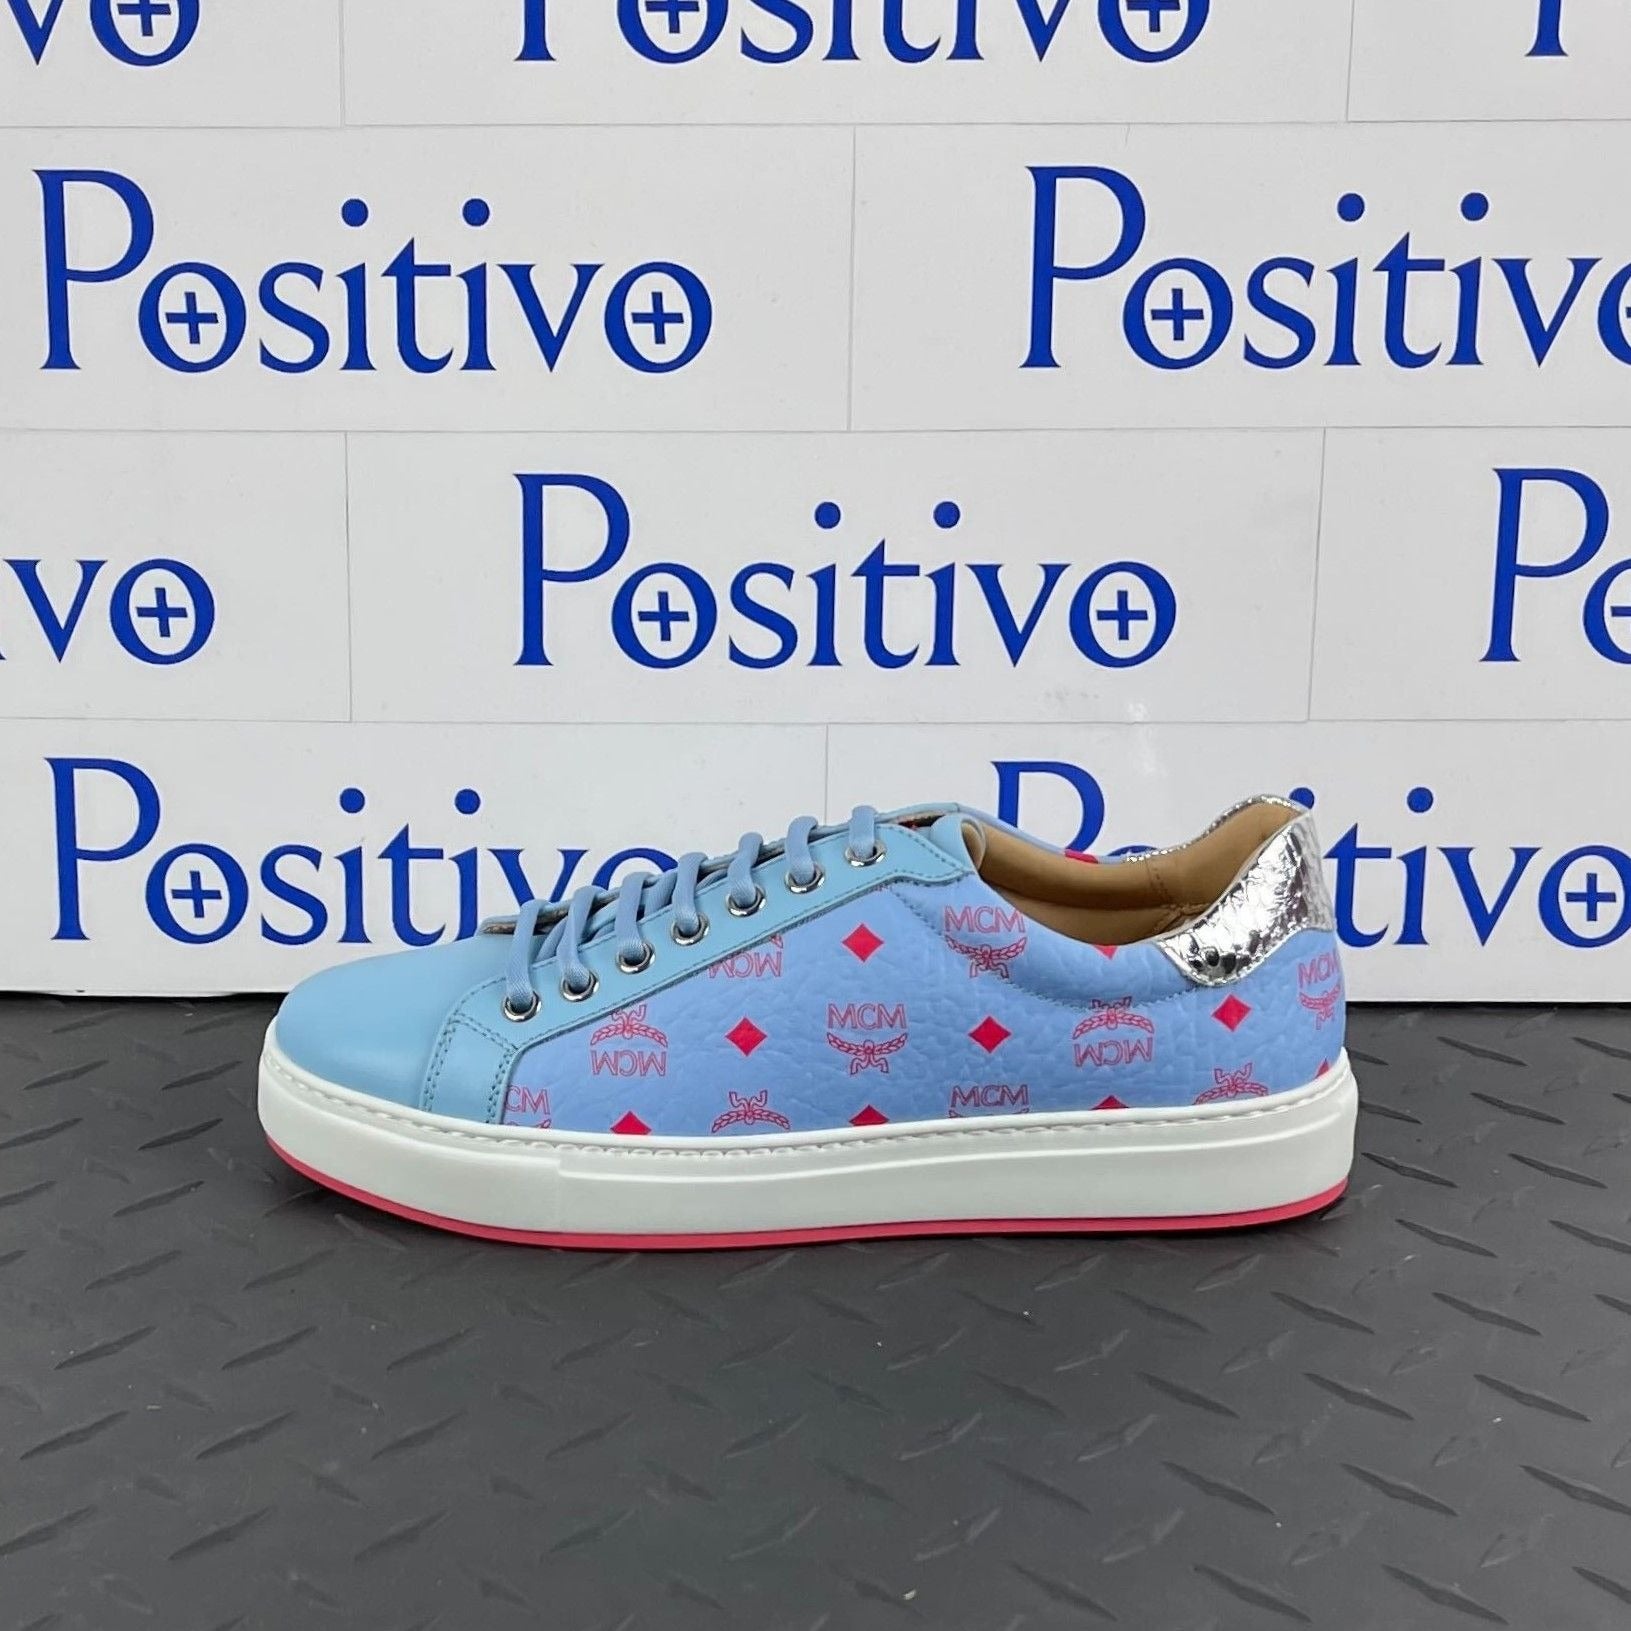 MCM Womens Blue Bell Leather Low Top Sneakers | Positivo Clothing